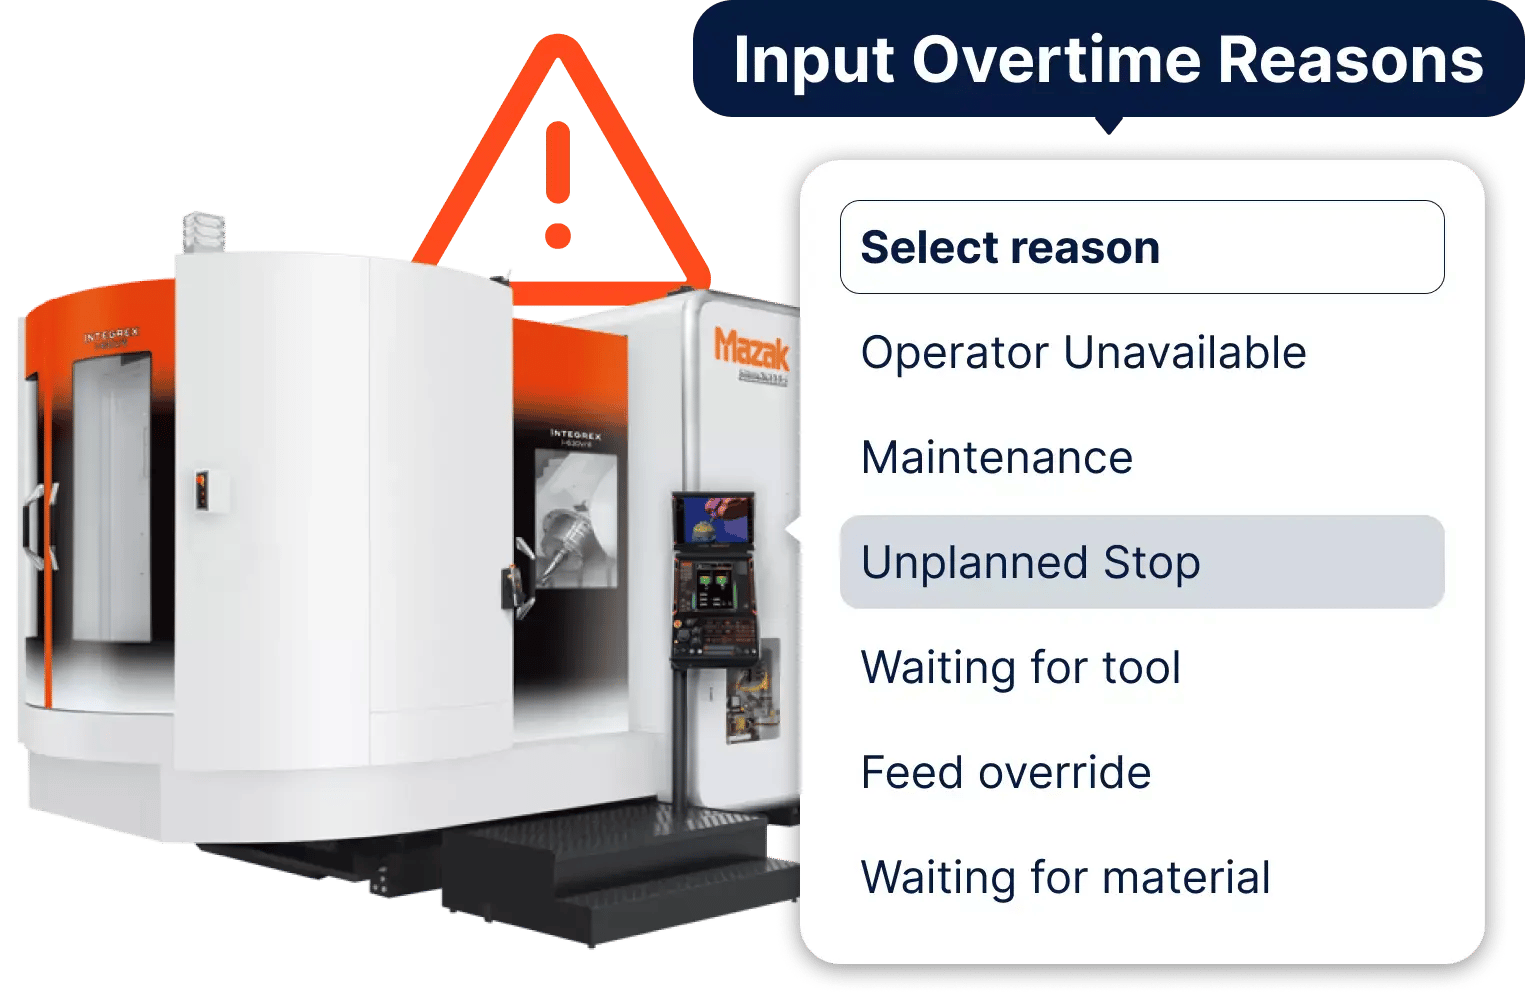 CNC operators can enter an overtime reasons in JITbase if it takes longer than expected